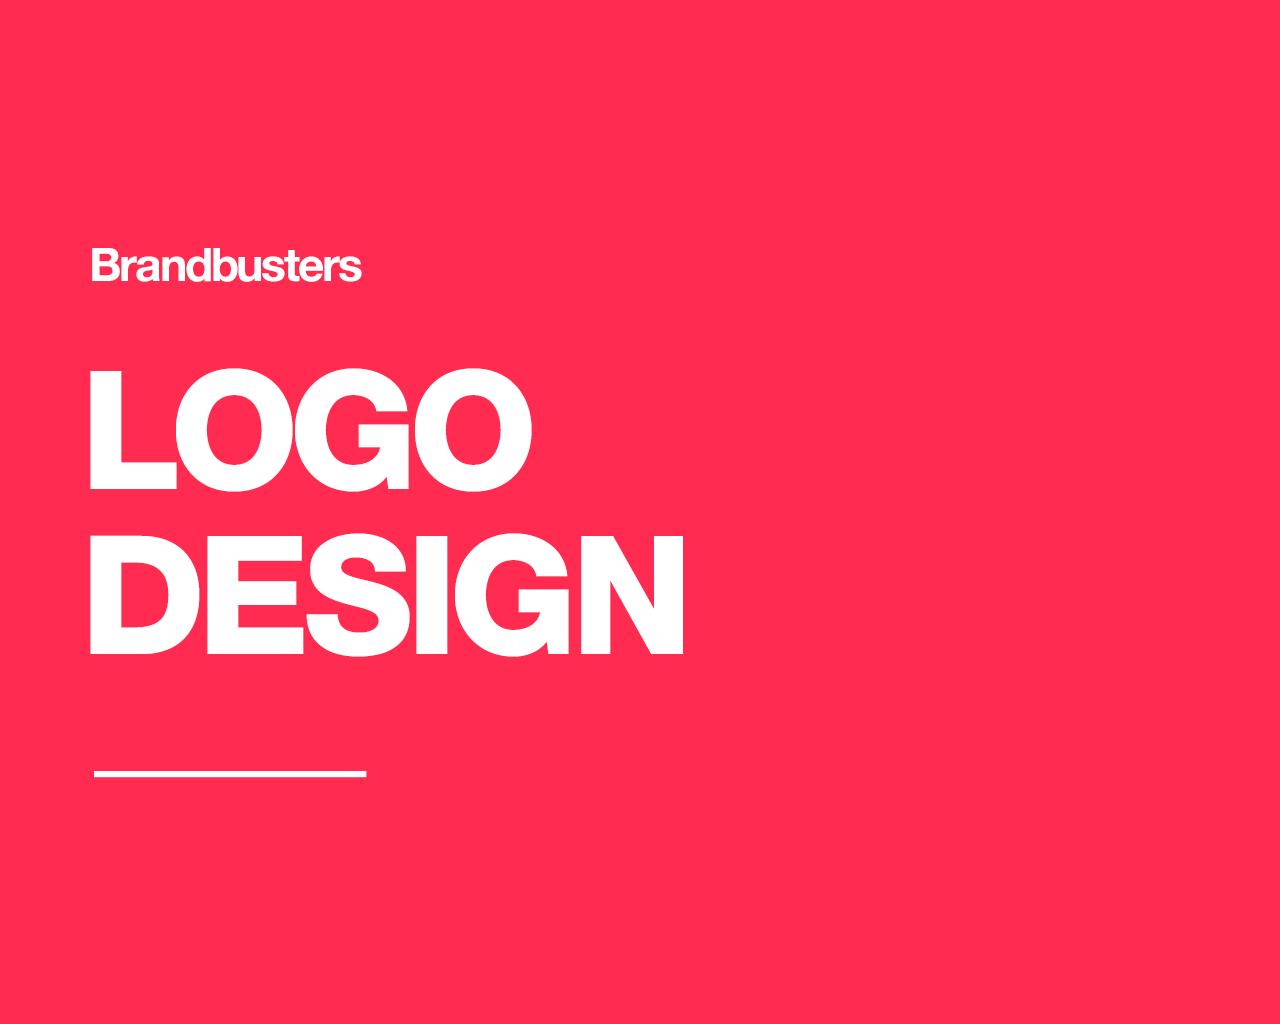 Pink and Red Logo - Professional Logo Design by Brandbusters on Envato Studio